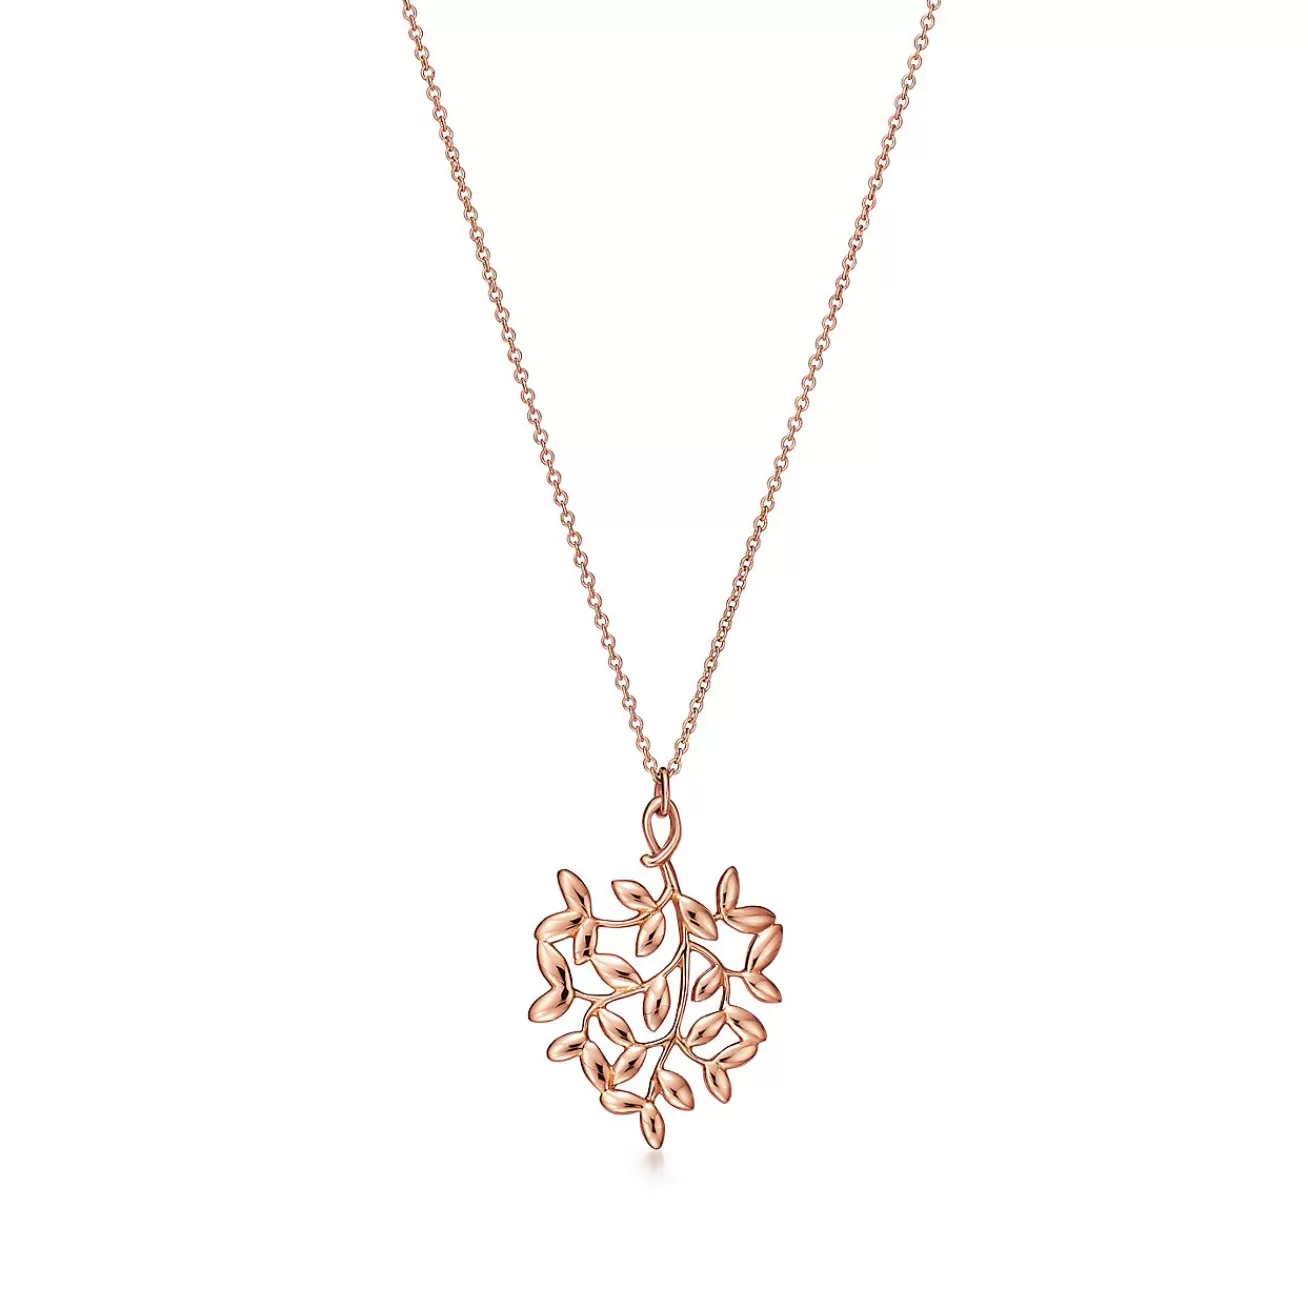 Tiffany & Co. Paloma Picasso® Olive Leaf pendant in 18k rose gold, small. | ^ Necklaces & Pendants | Rose Gold Jewelry